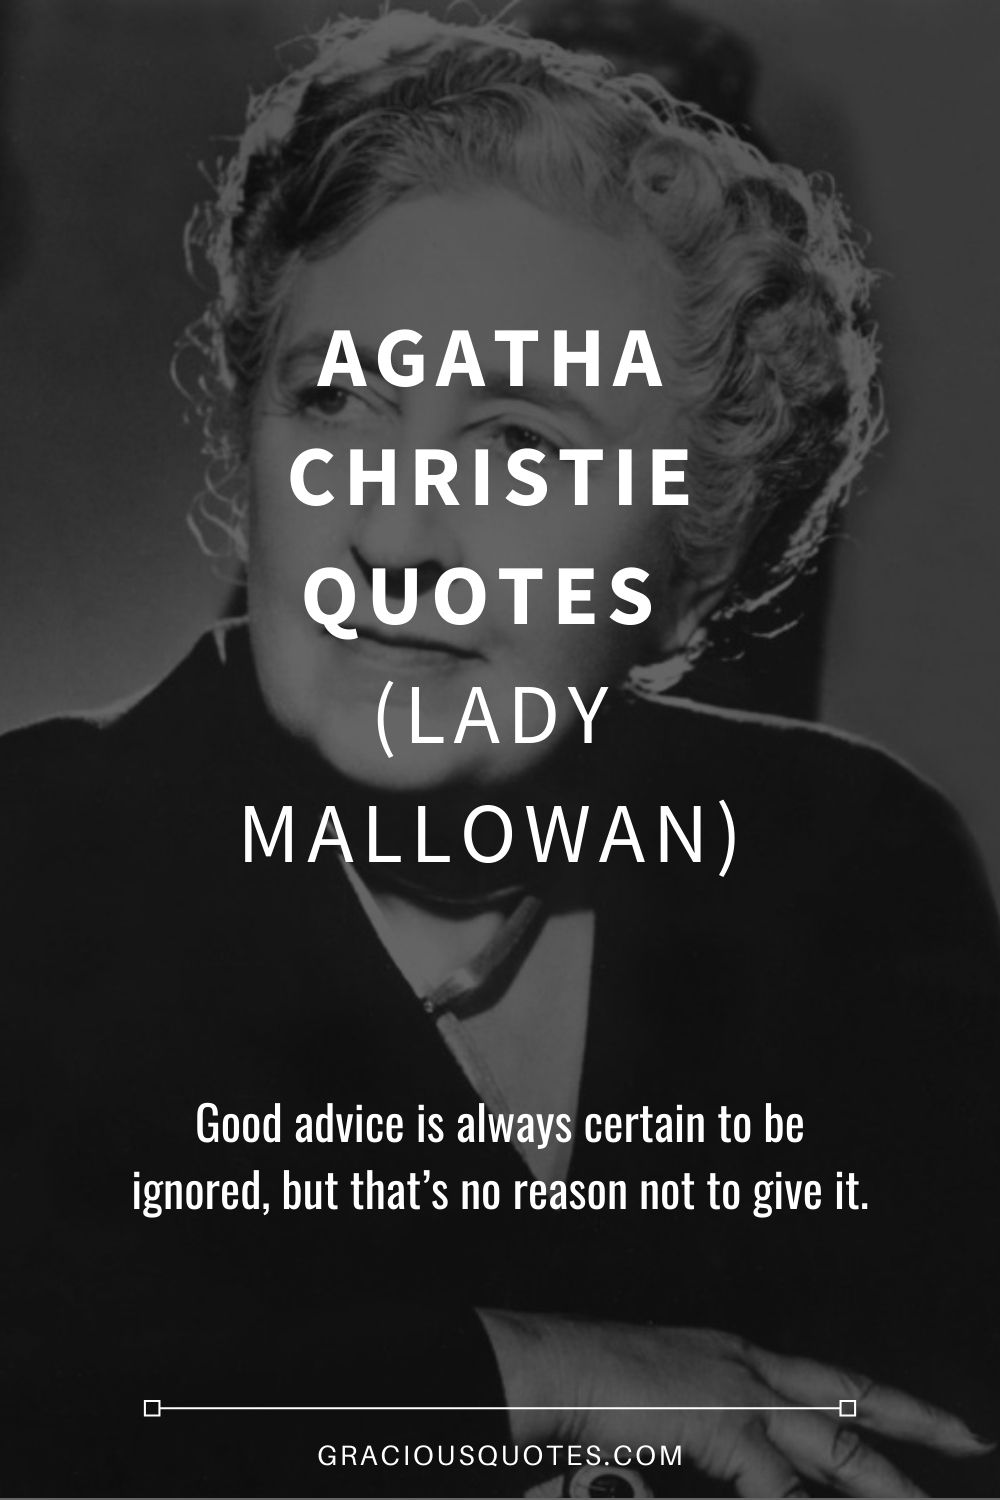 Agatha Christie Quotes (LADY MALLOWAN) - Gracious Quotes